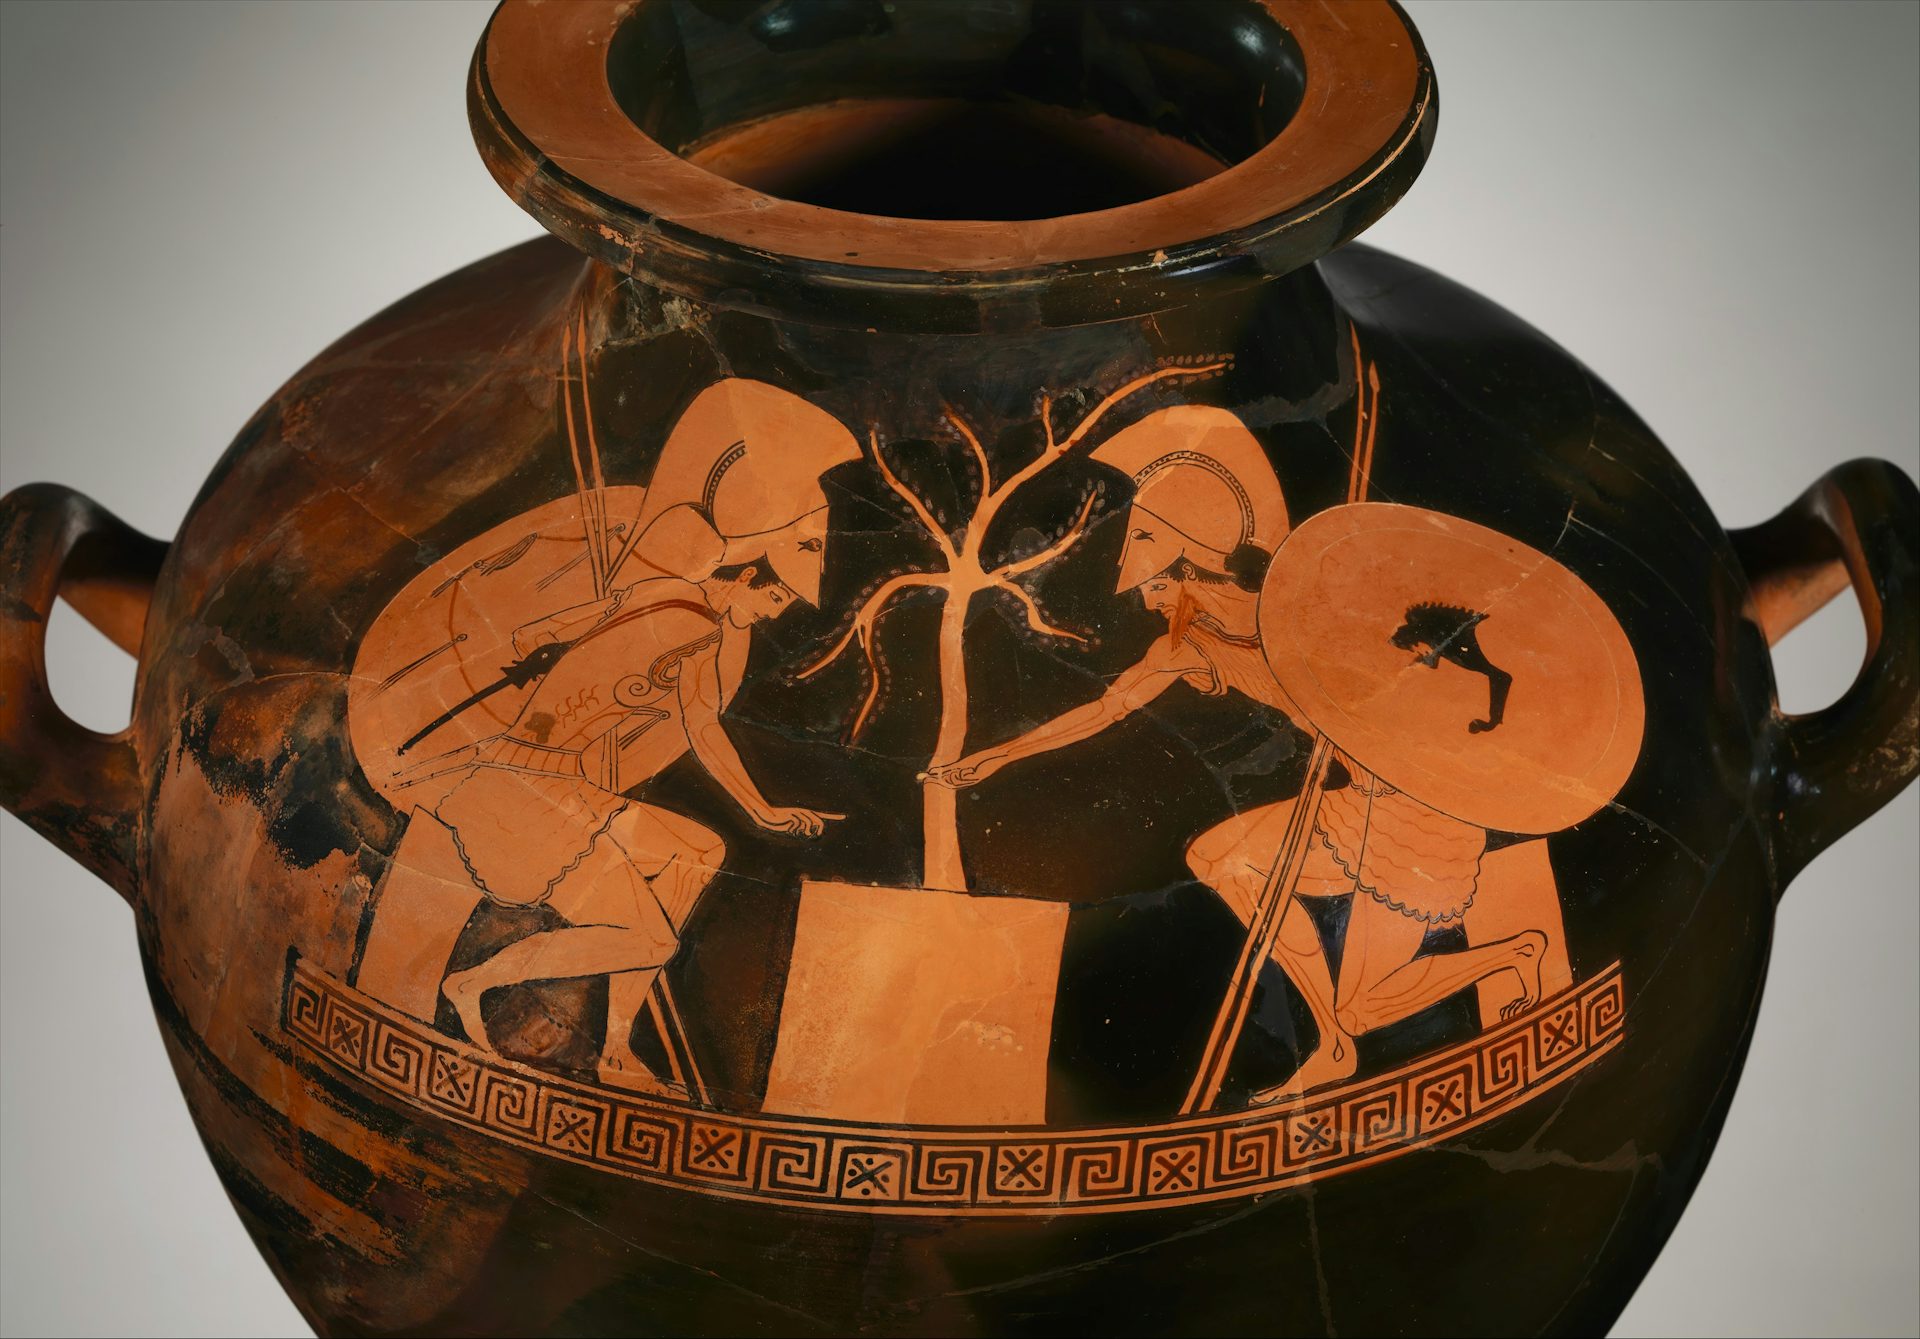 Vase painting of Ajax and Achilles playing